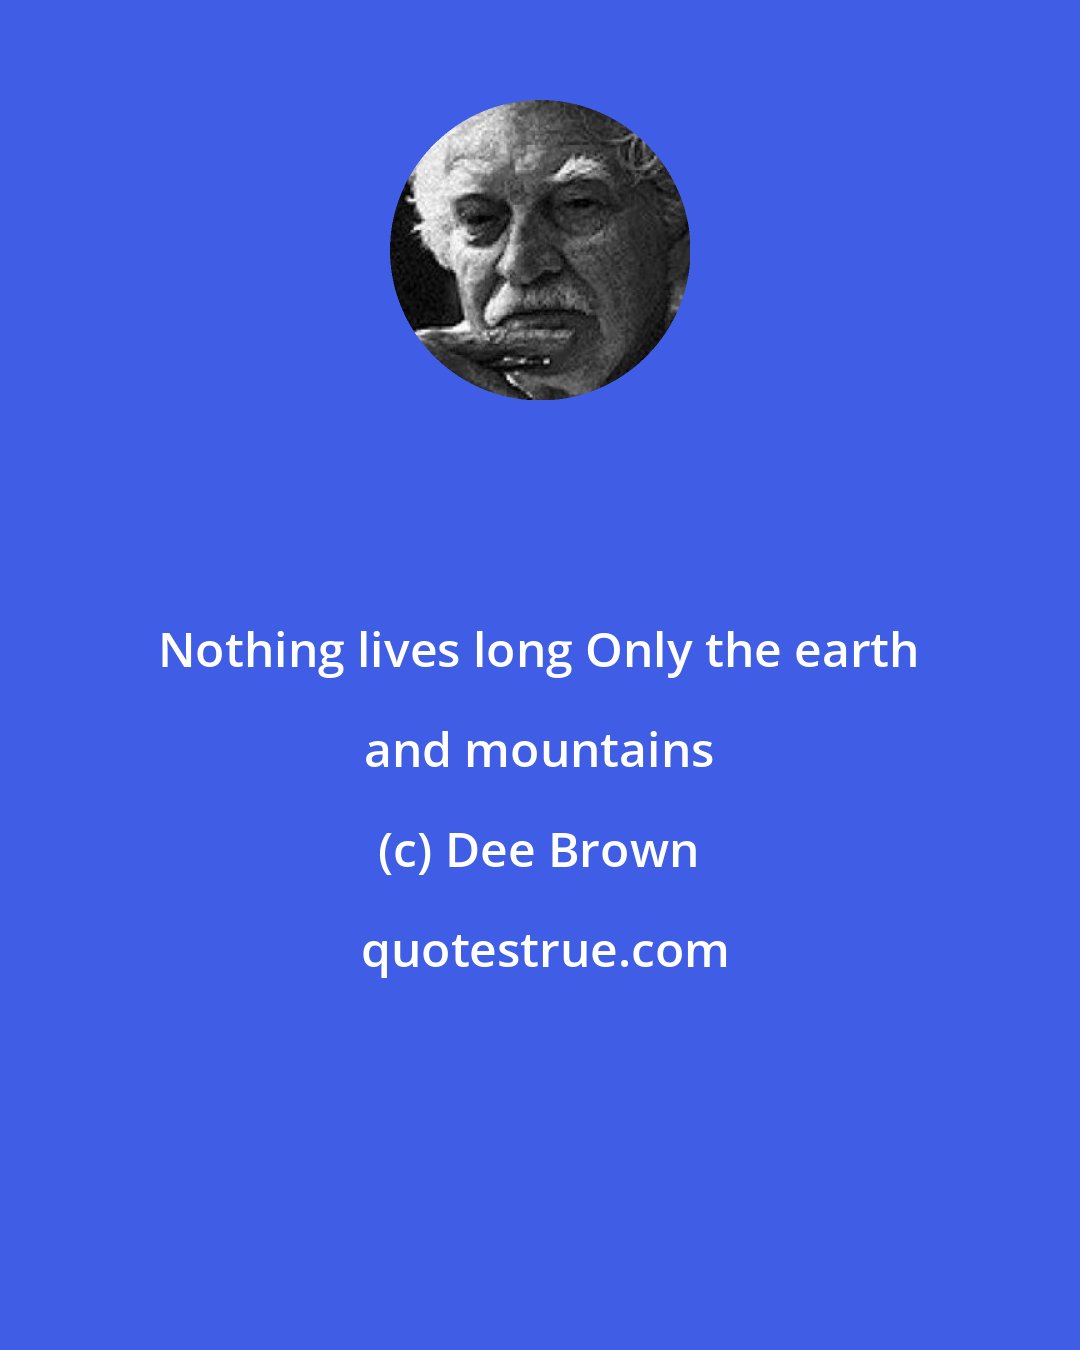 Dee Brown: Nothing lives long Only the earth and mountains